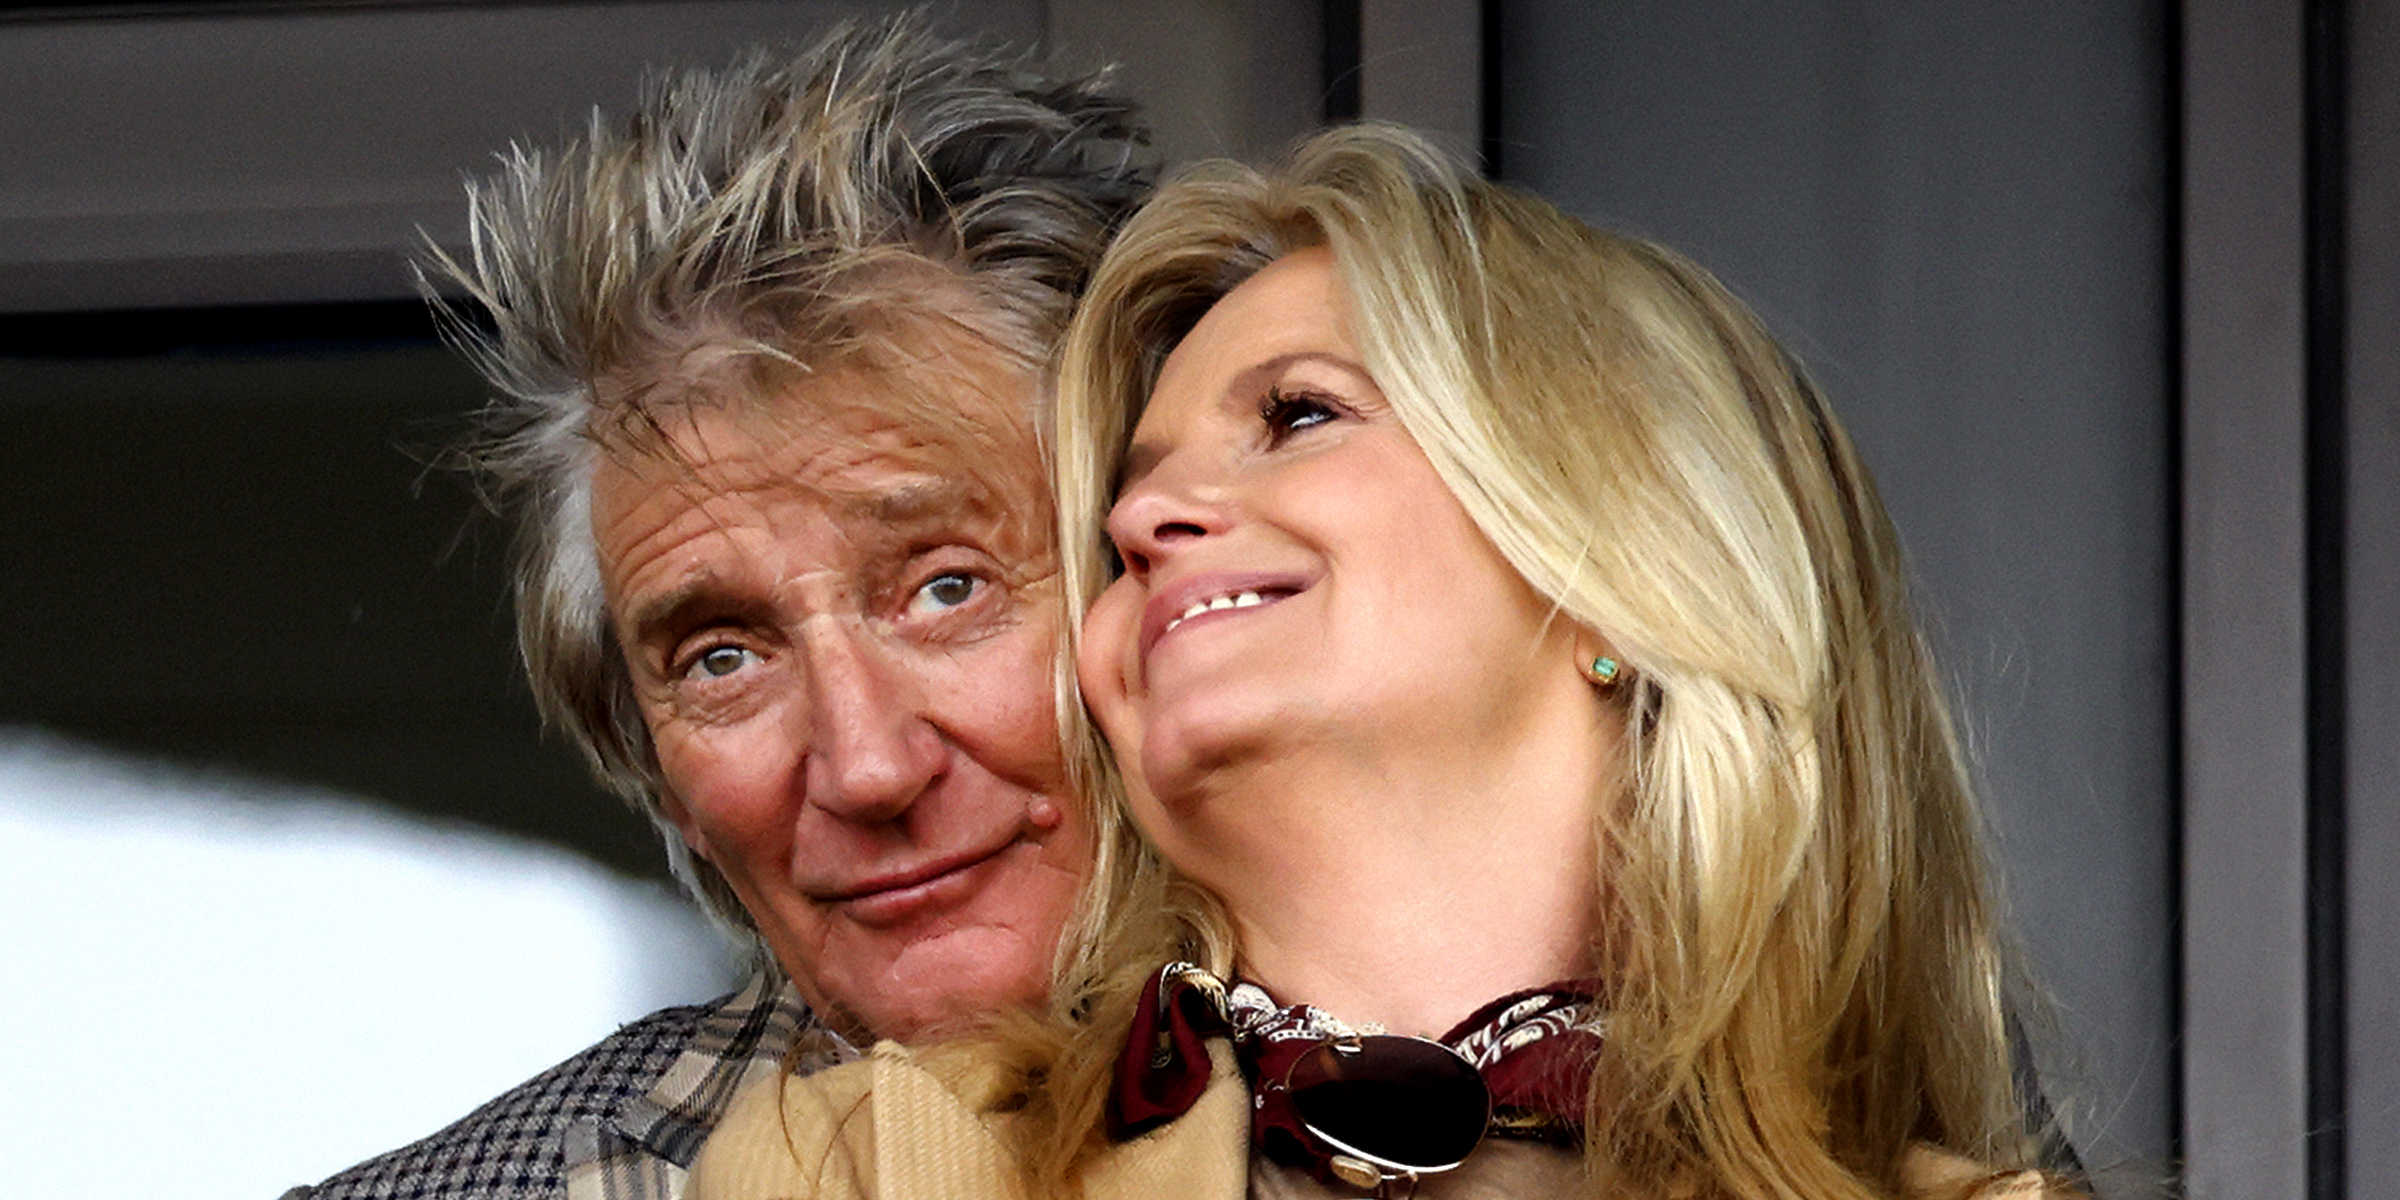 Rob Stewart and Penny Lancaster | Source: Getty Images